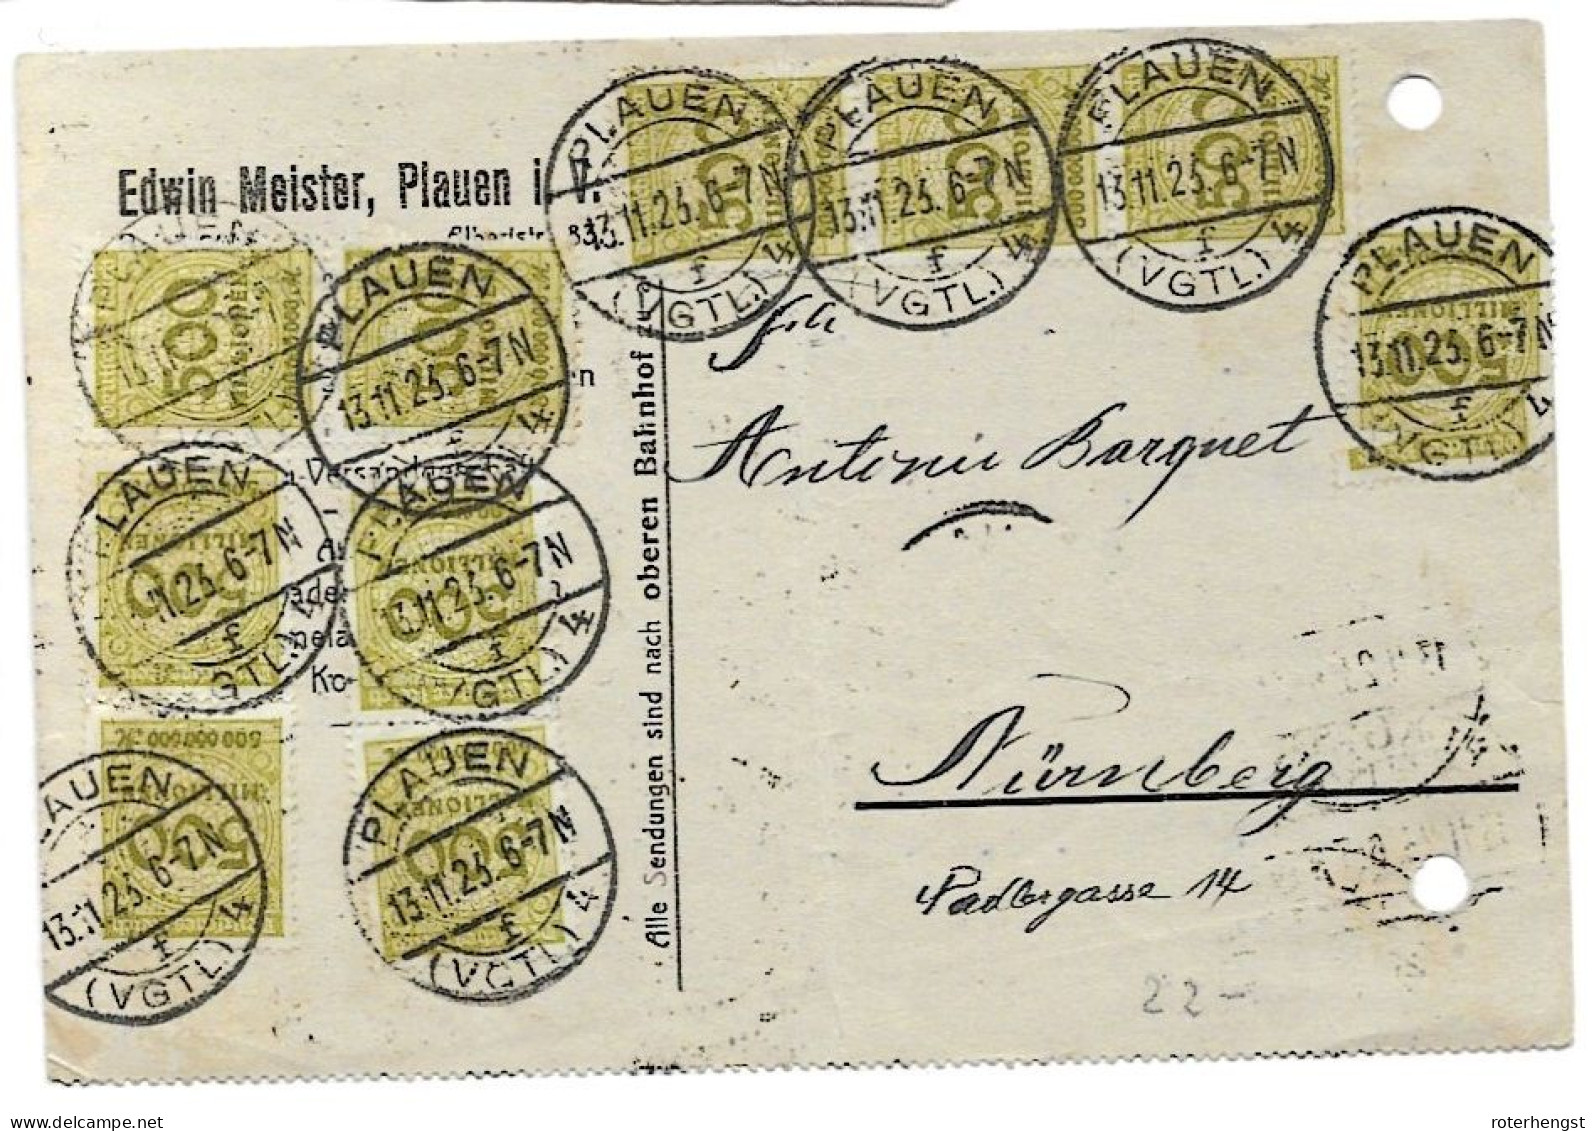 Germany Inflation Card Plauen 13.11.1923 5 Billion Marks Tariff - Covers & Documents